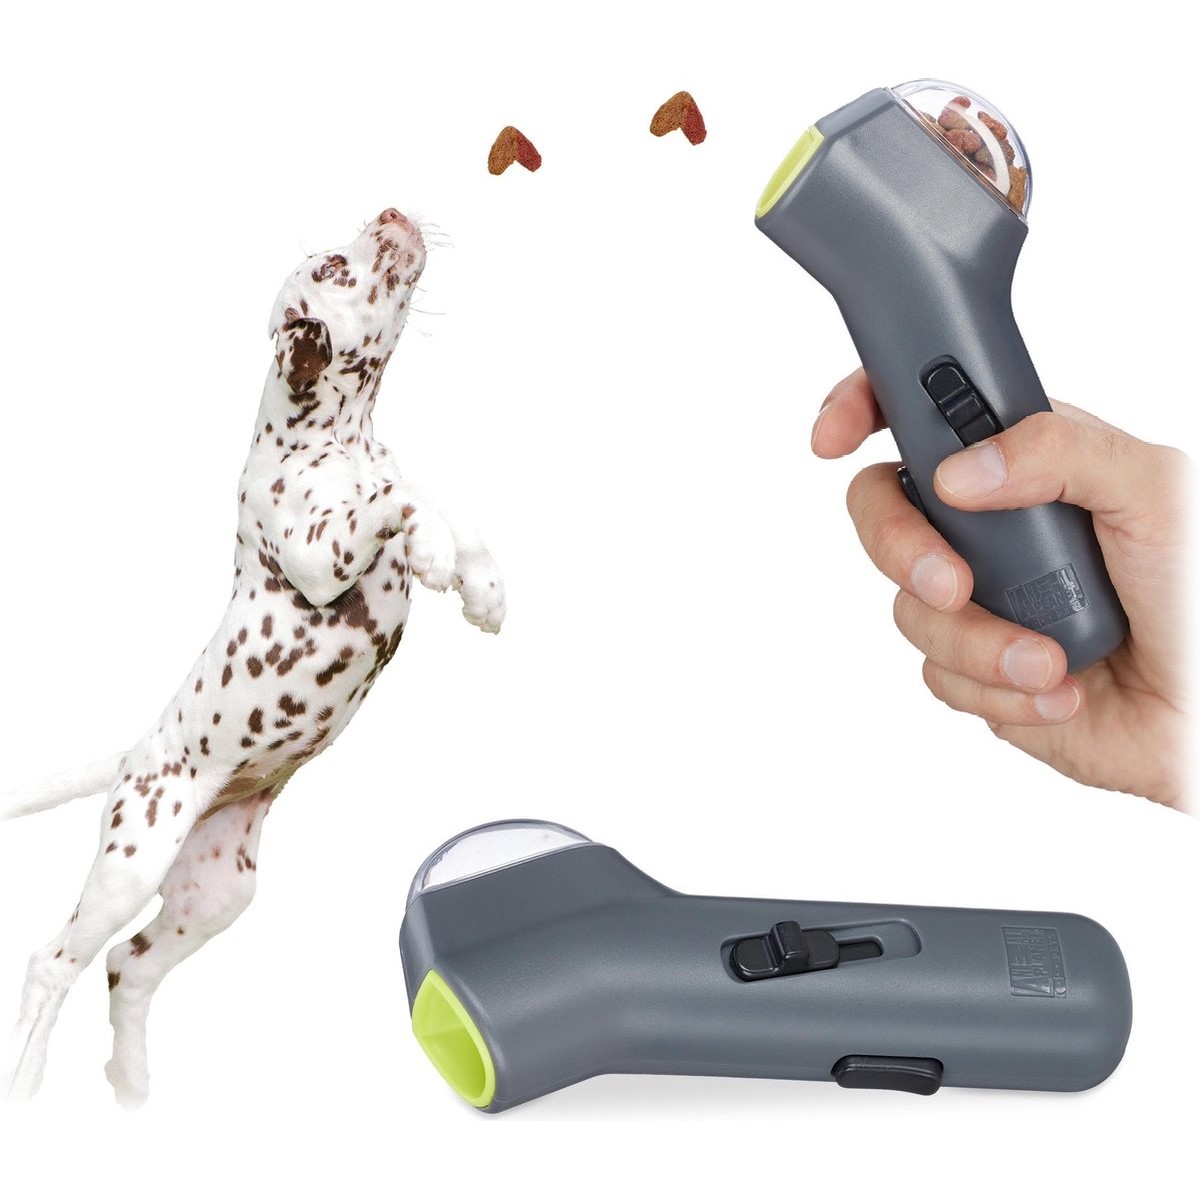 Buy Mimzi Treat Launcher for your dog